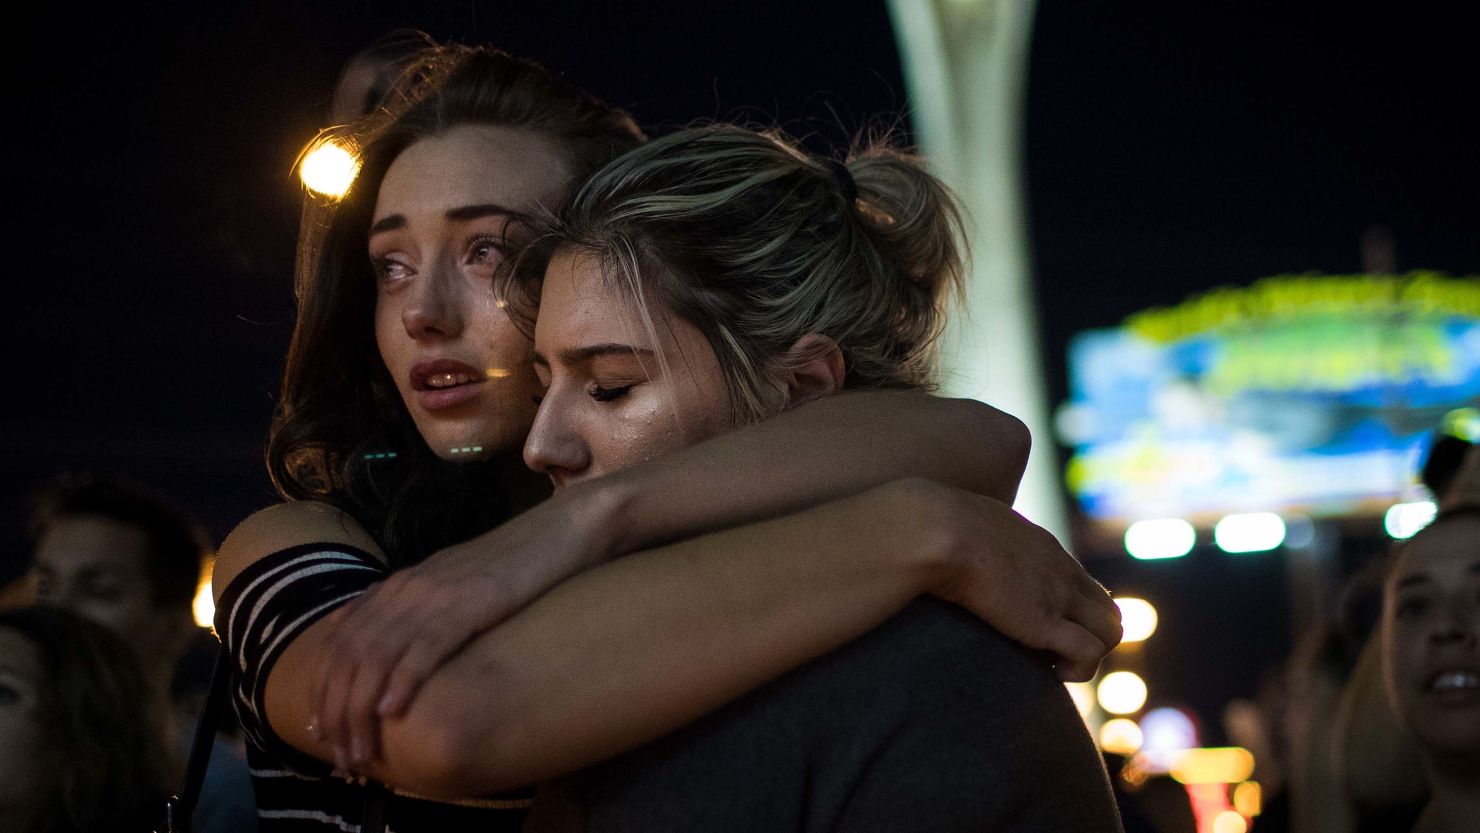 Mourners attend a candlelight vigil for the victims of the mass shooting, October 2, 2017 in Las Vegas, Nevada. 